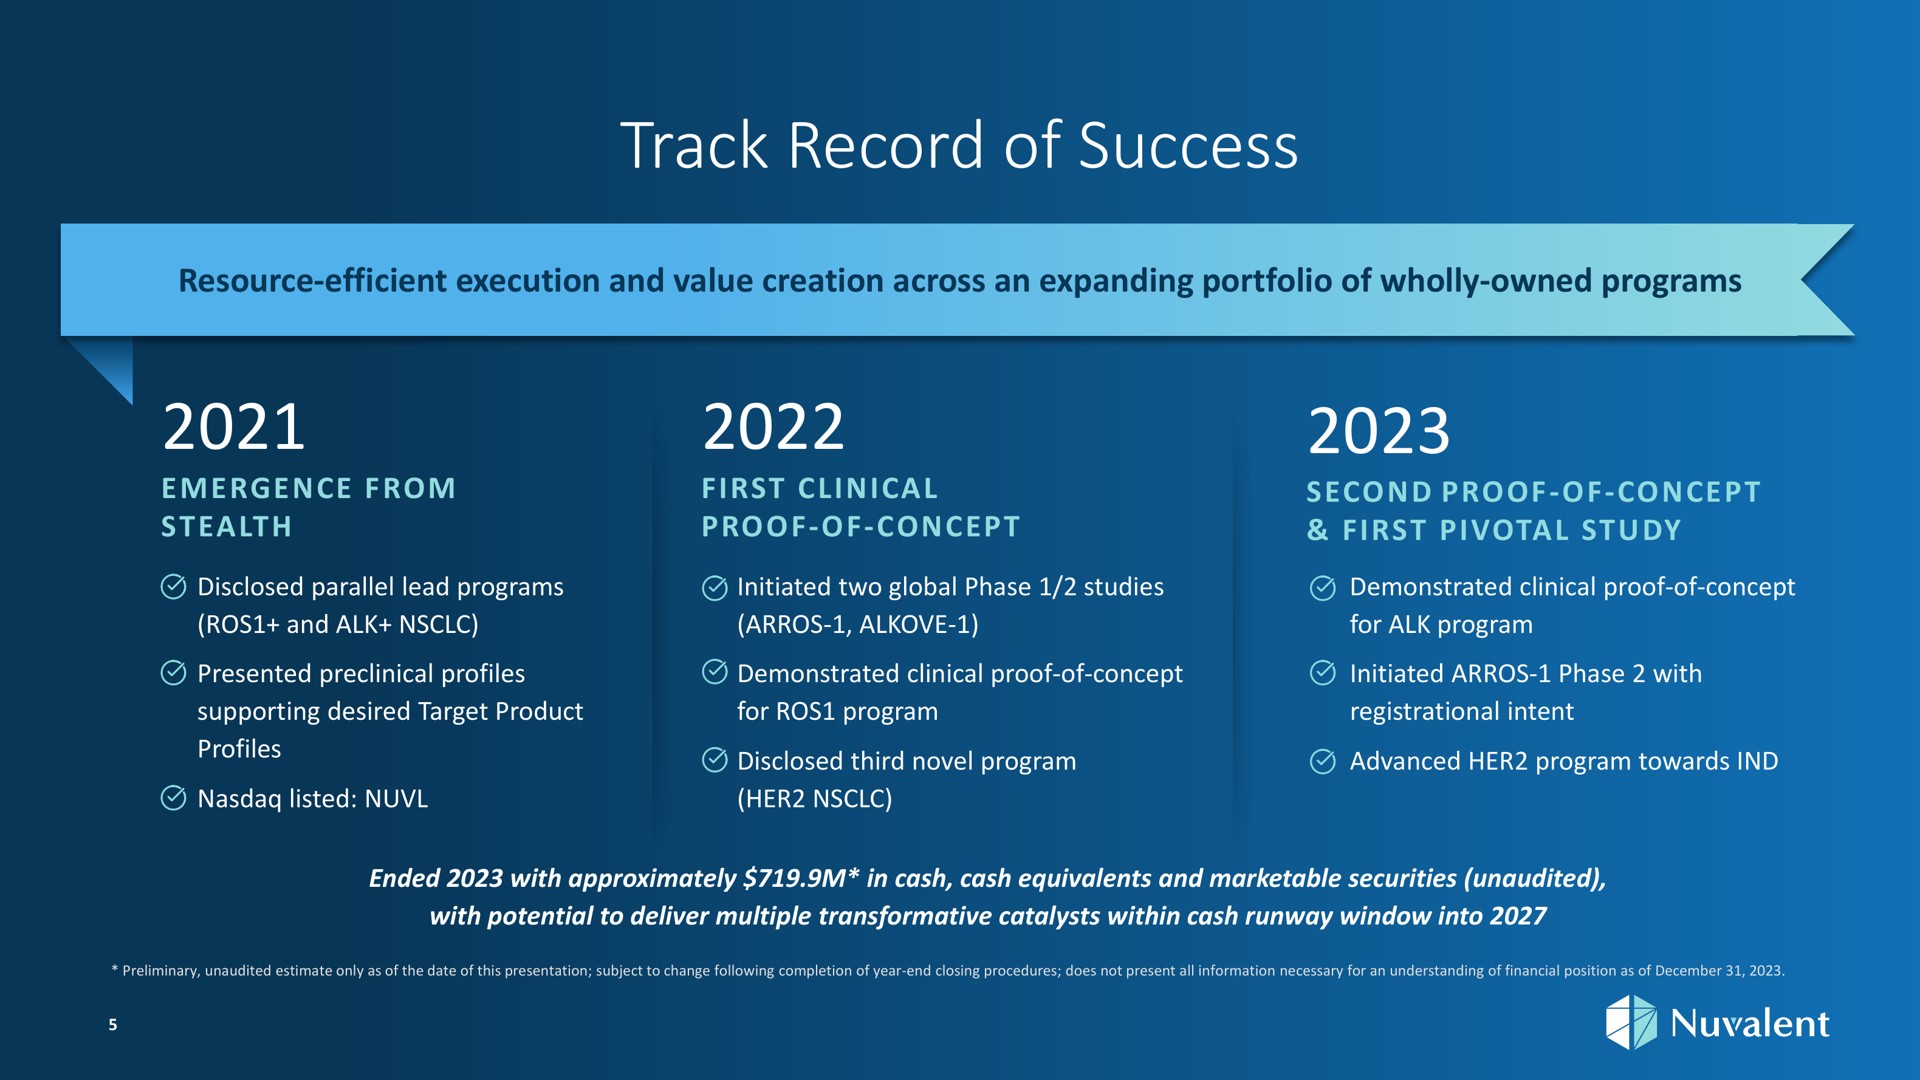 track record of success resource efficient execution and value creation across an expanding portfolio wholly owned programs emergence from first clinical proof of concept second proof of concept first pivotal study disclosed parallel lead programs initiated two global phase studies demonstrated clinical proof of concept and alk for alk program presented preclinical profiles demonstrated clinical proof of concept initiated phase with supporting desired target product for program registrational intent disclosed third novel program advanced her program towards listed her ended with approximately in cash cash equivalents and marketable securities unaudited with potential to deliver multiple transformative catalysts within cash runway window into preliminary unaudited estimate only as the date this presentation subject to change following completion year end closing procedures does not present all information necessary for an understanding financial position as a | Nuvalent